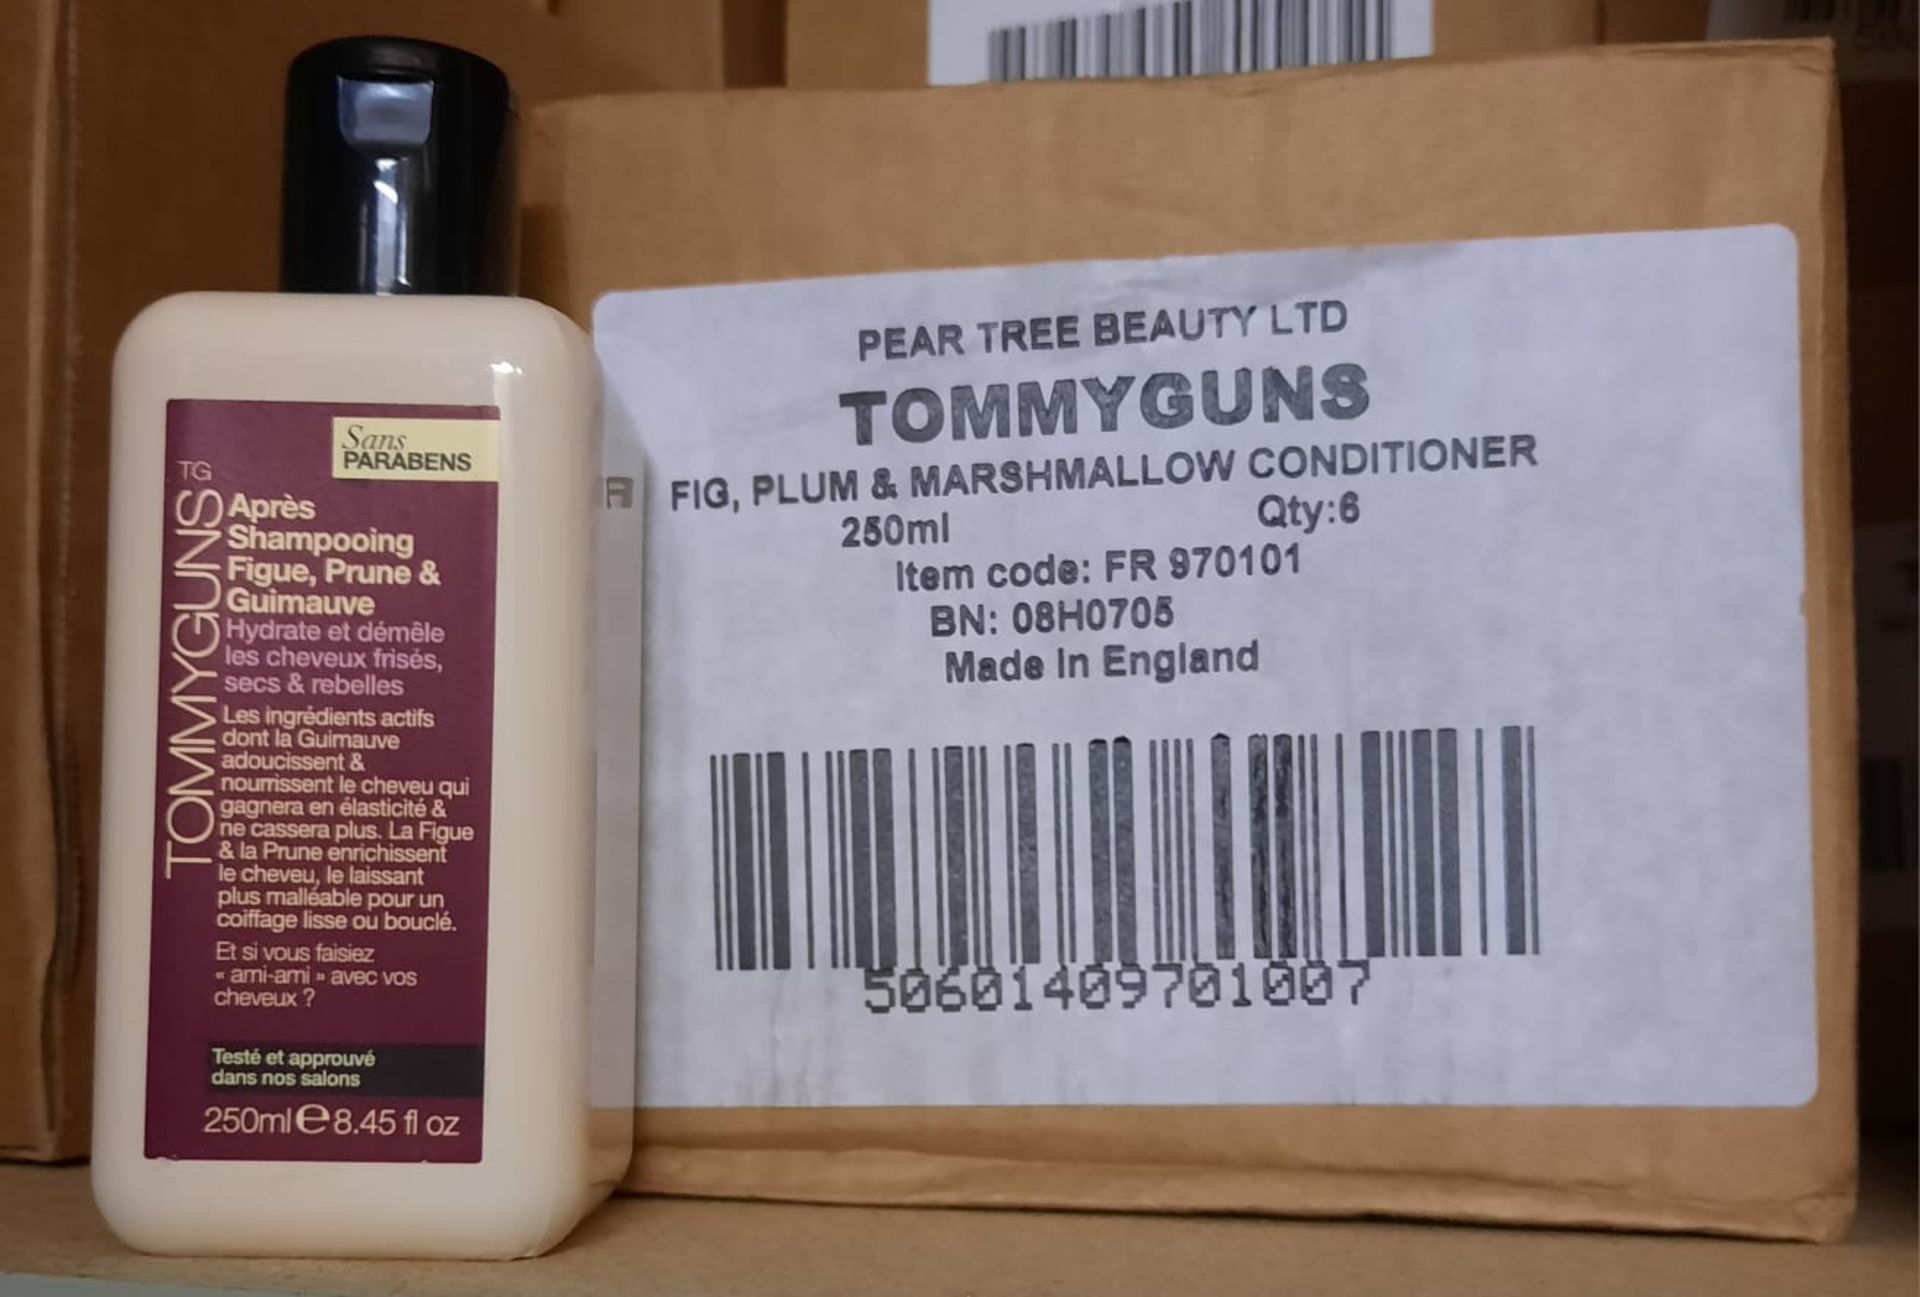 RRP £116.40 - X 4 BOXES OF 6 TOMMYGUNS FIG, PLUM & MARSHMALLOW CONDITIONER FOR FRIZZY HAIR. 250ML.